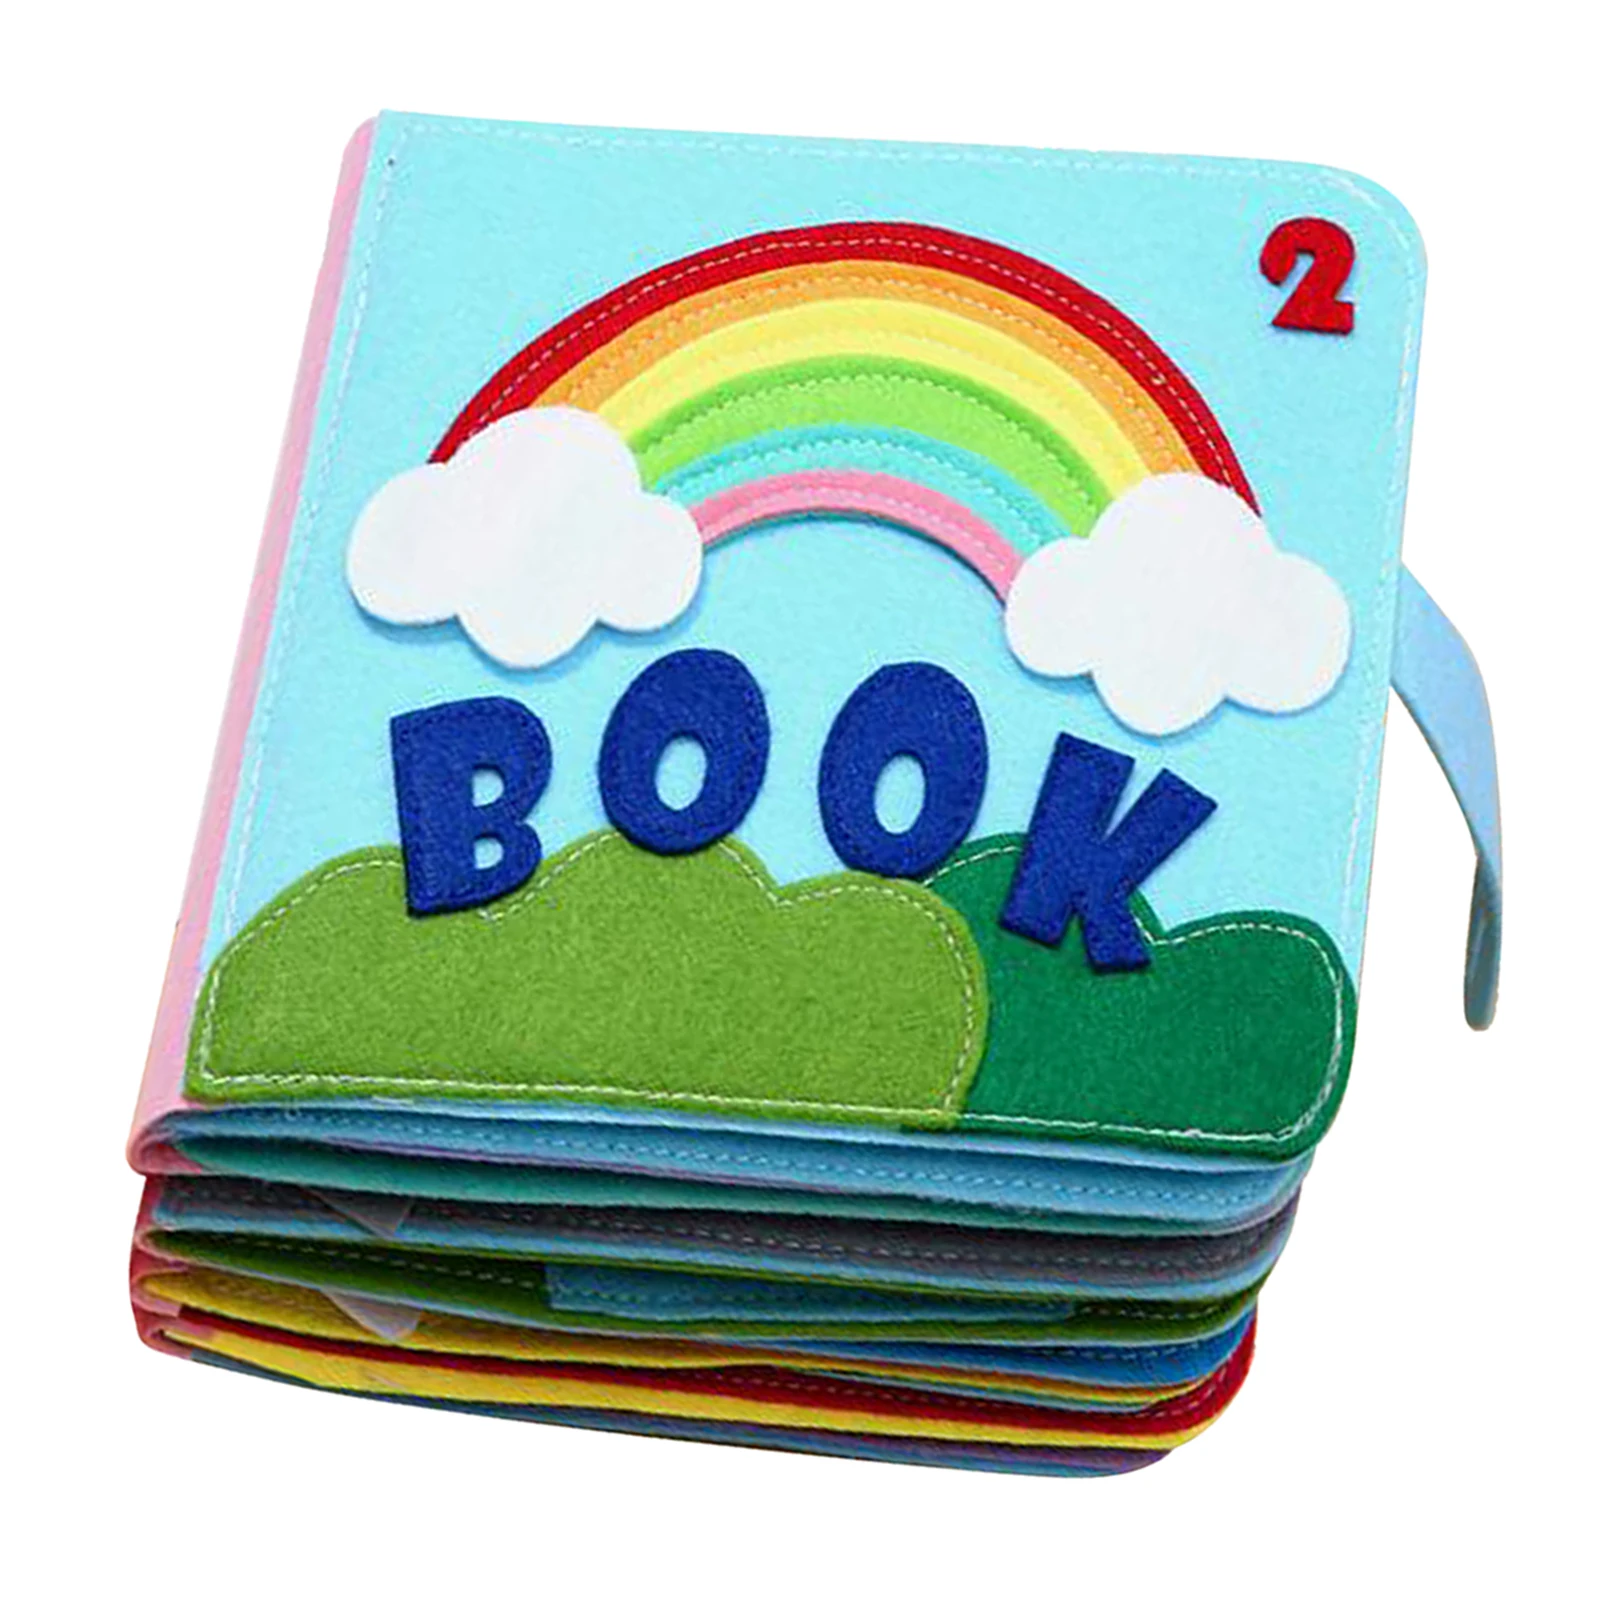 

My Quiet Book ,Felt Soft Cloth Book ,Touch and Feel, 3D Books Fabric Activity for Babies /Toddlers, Learning to Sensory Book